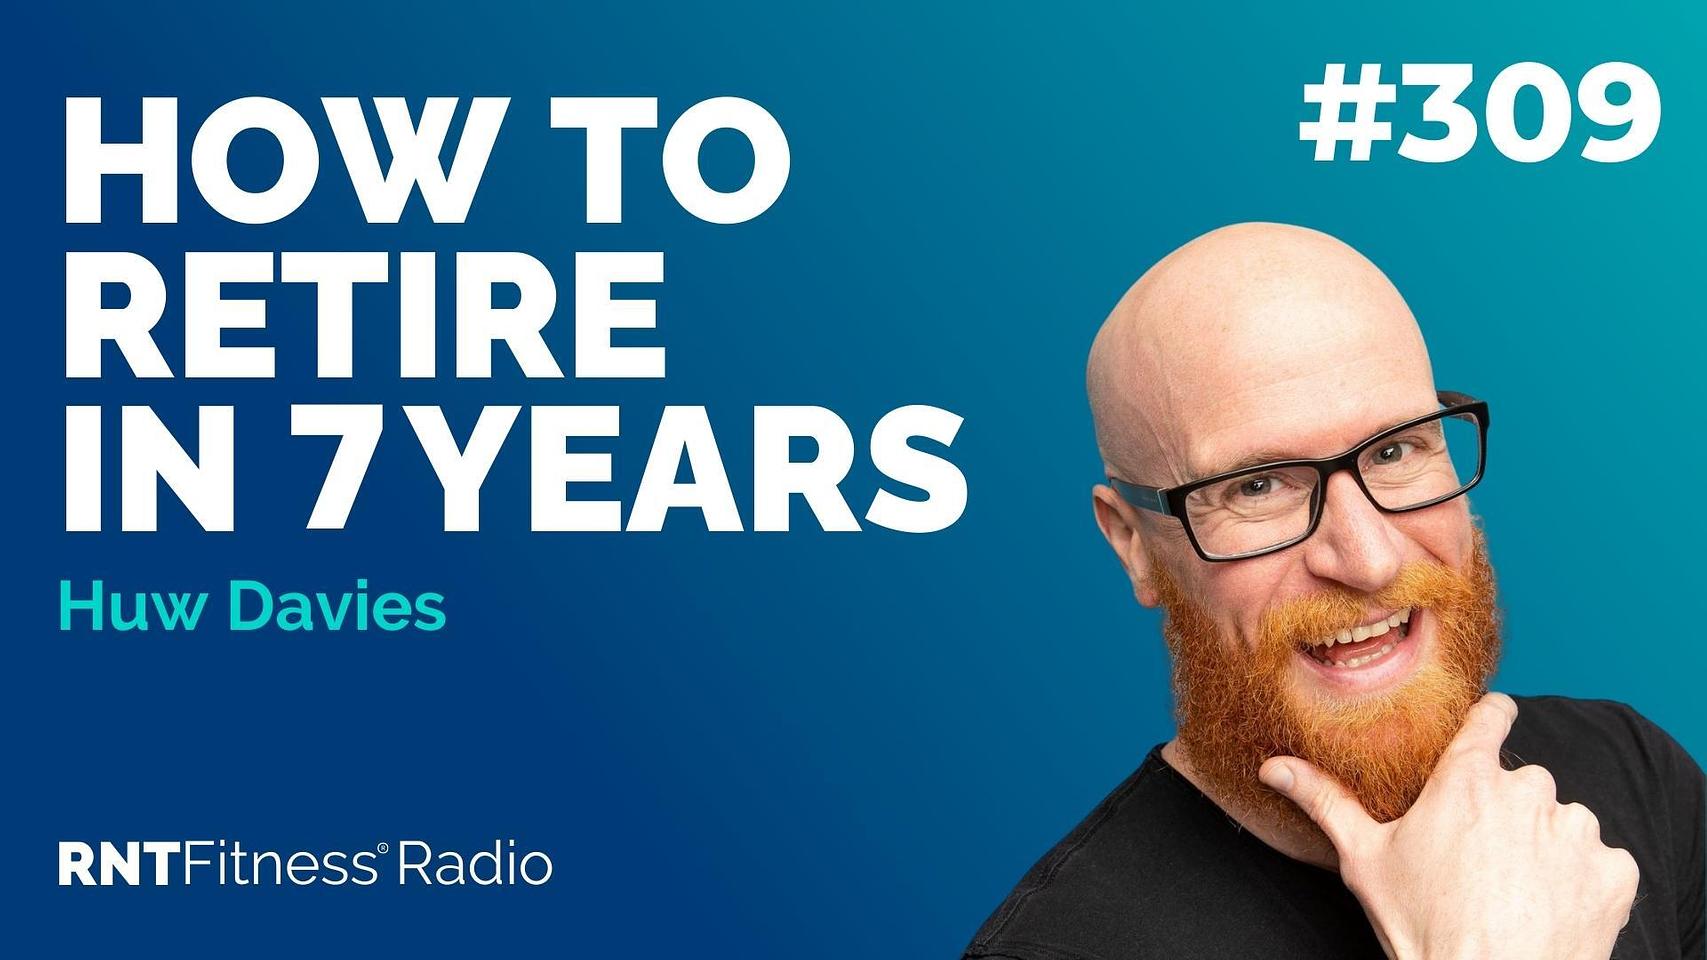 Ep 309 - How To Retire In 7 Years w/ Huw Davies